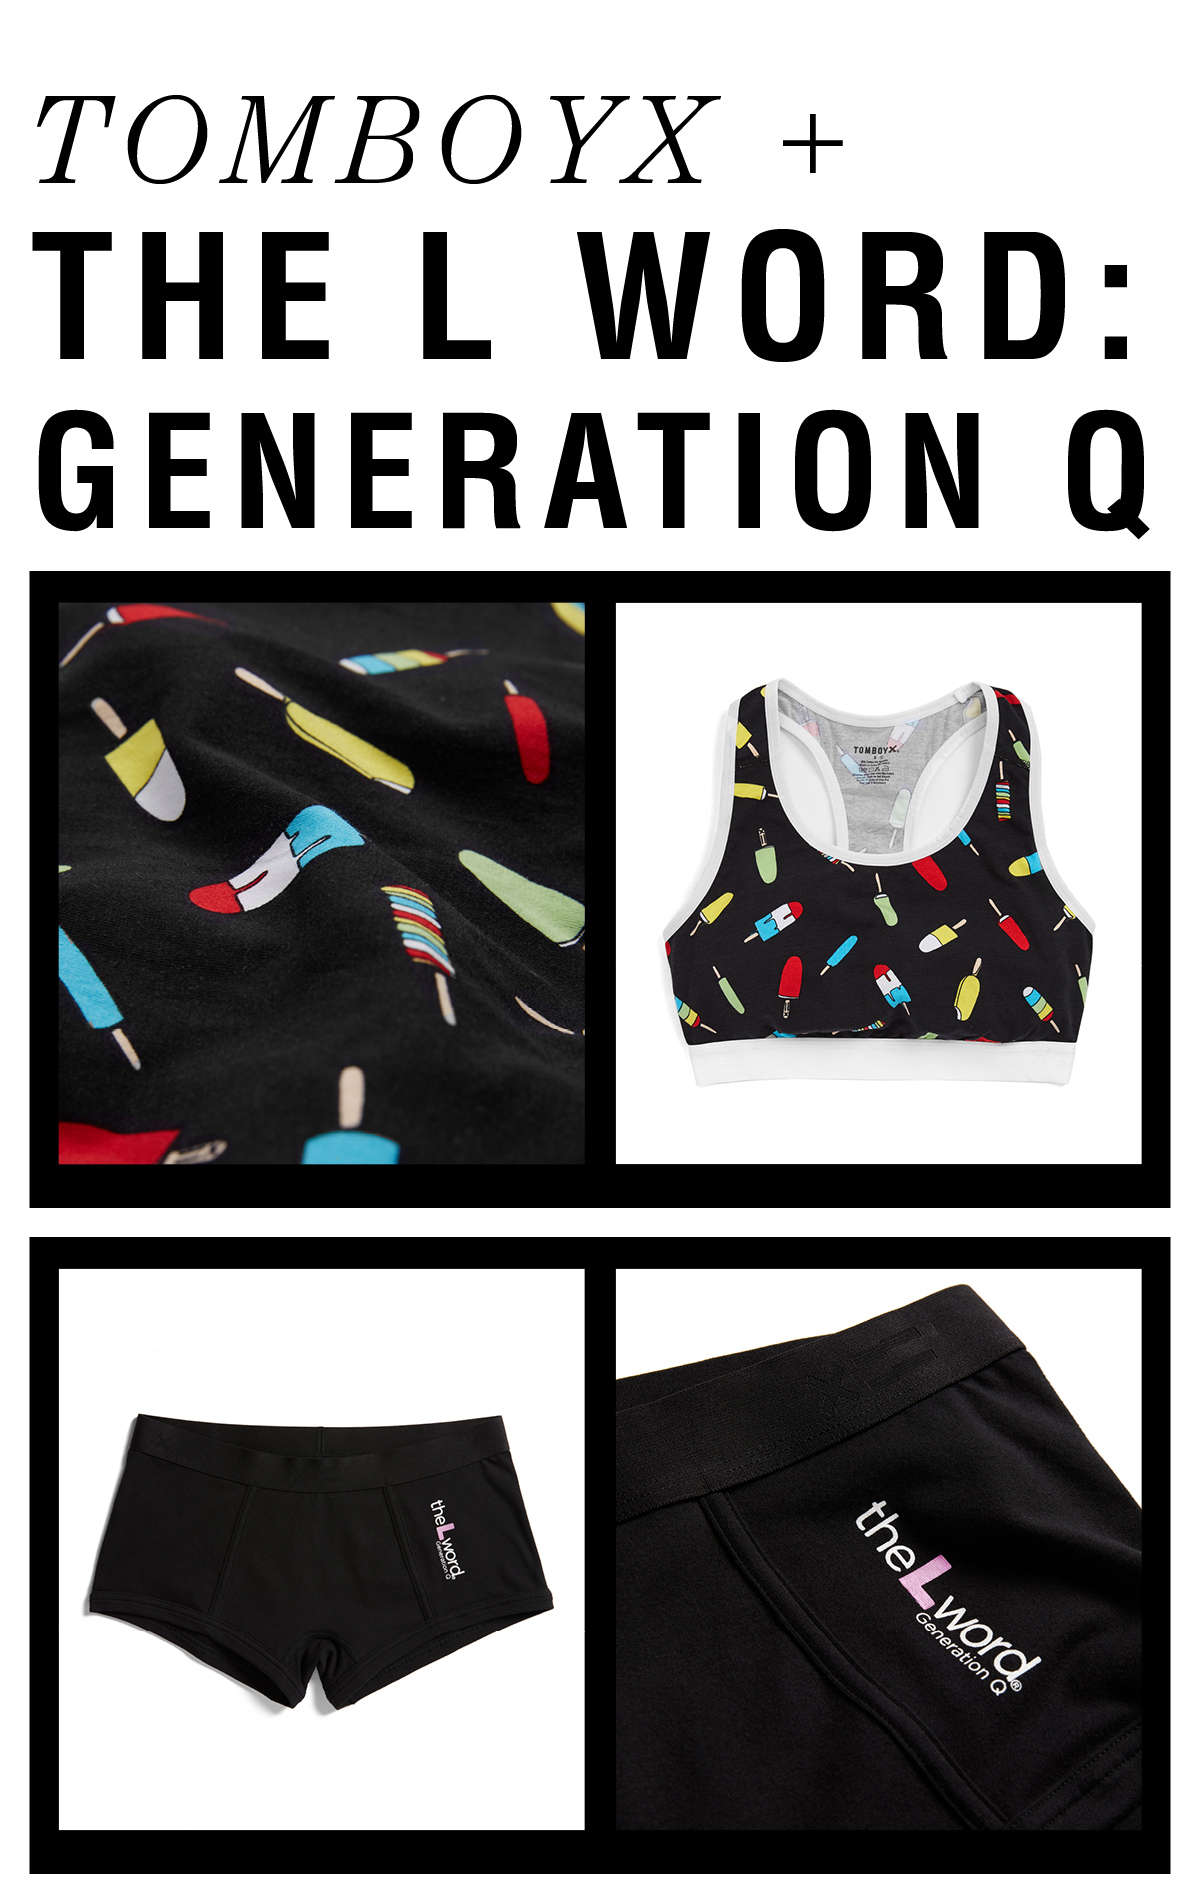 As seen on The L-Word: Generation Q. L Word collection shown.